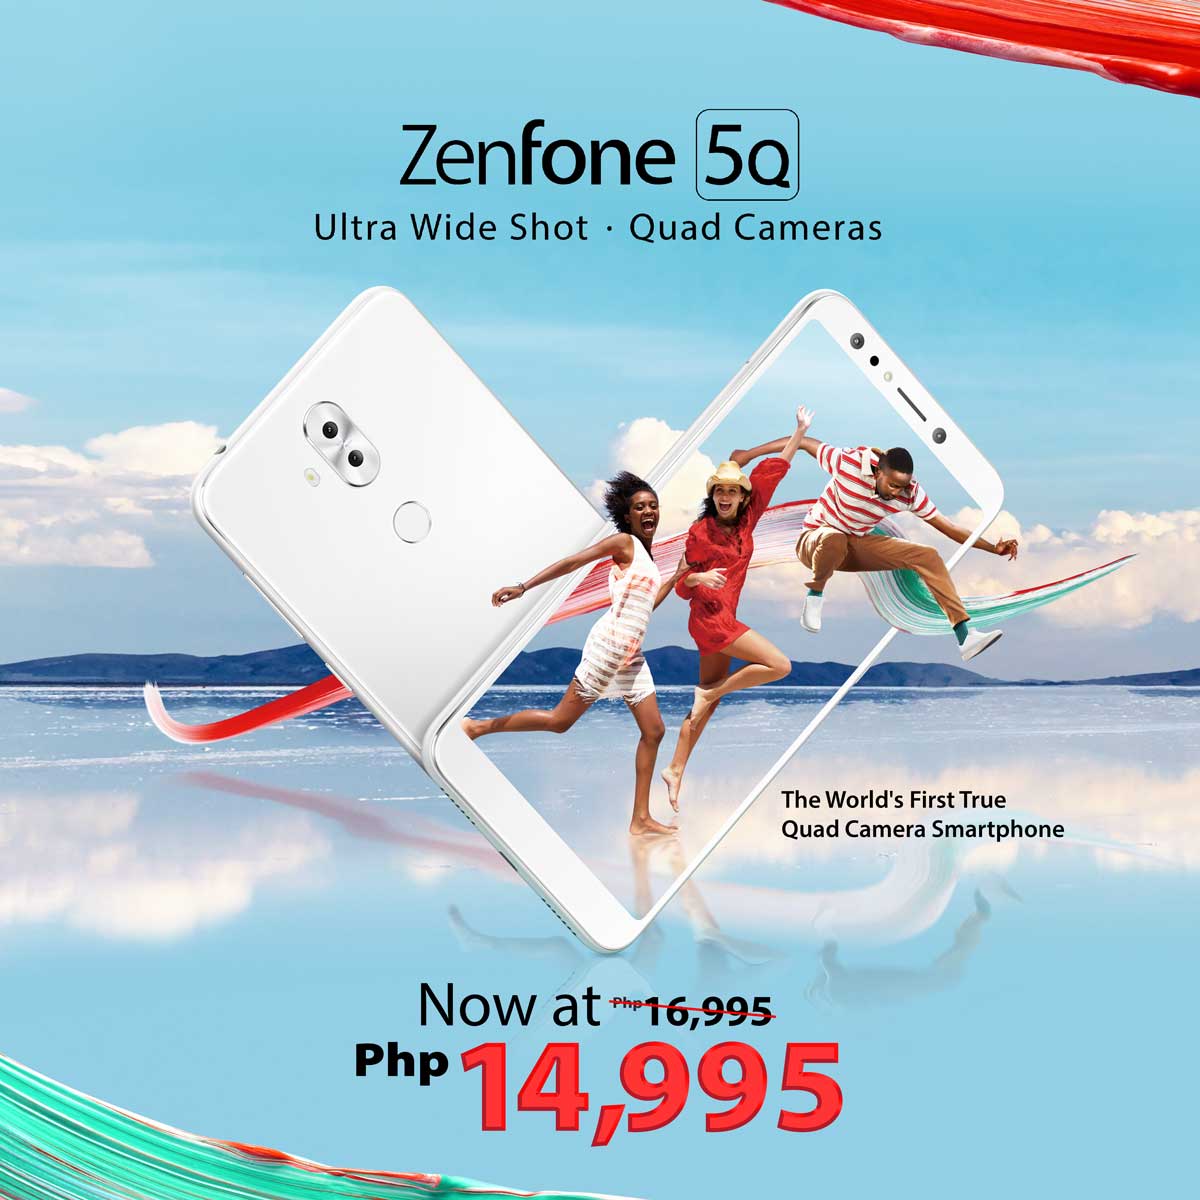 Zenfone 5Q now available for only Php 14,995